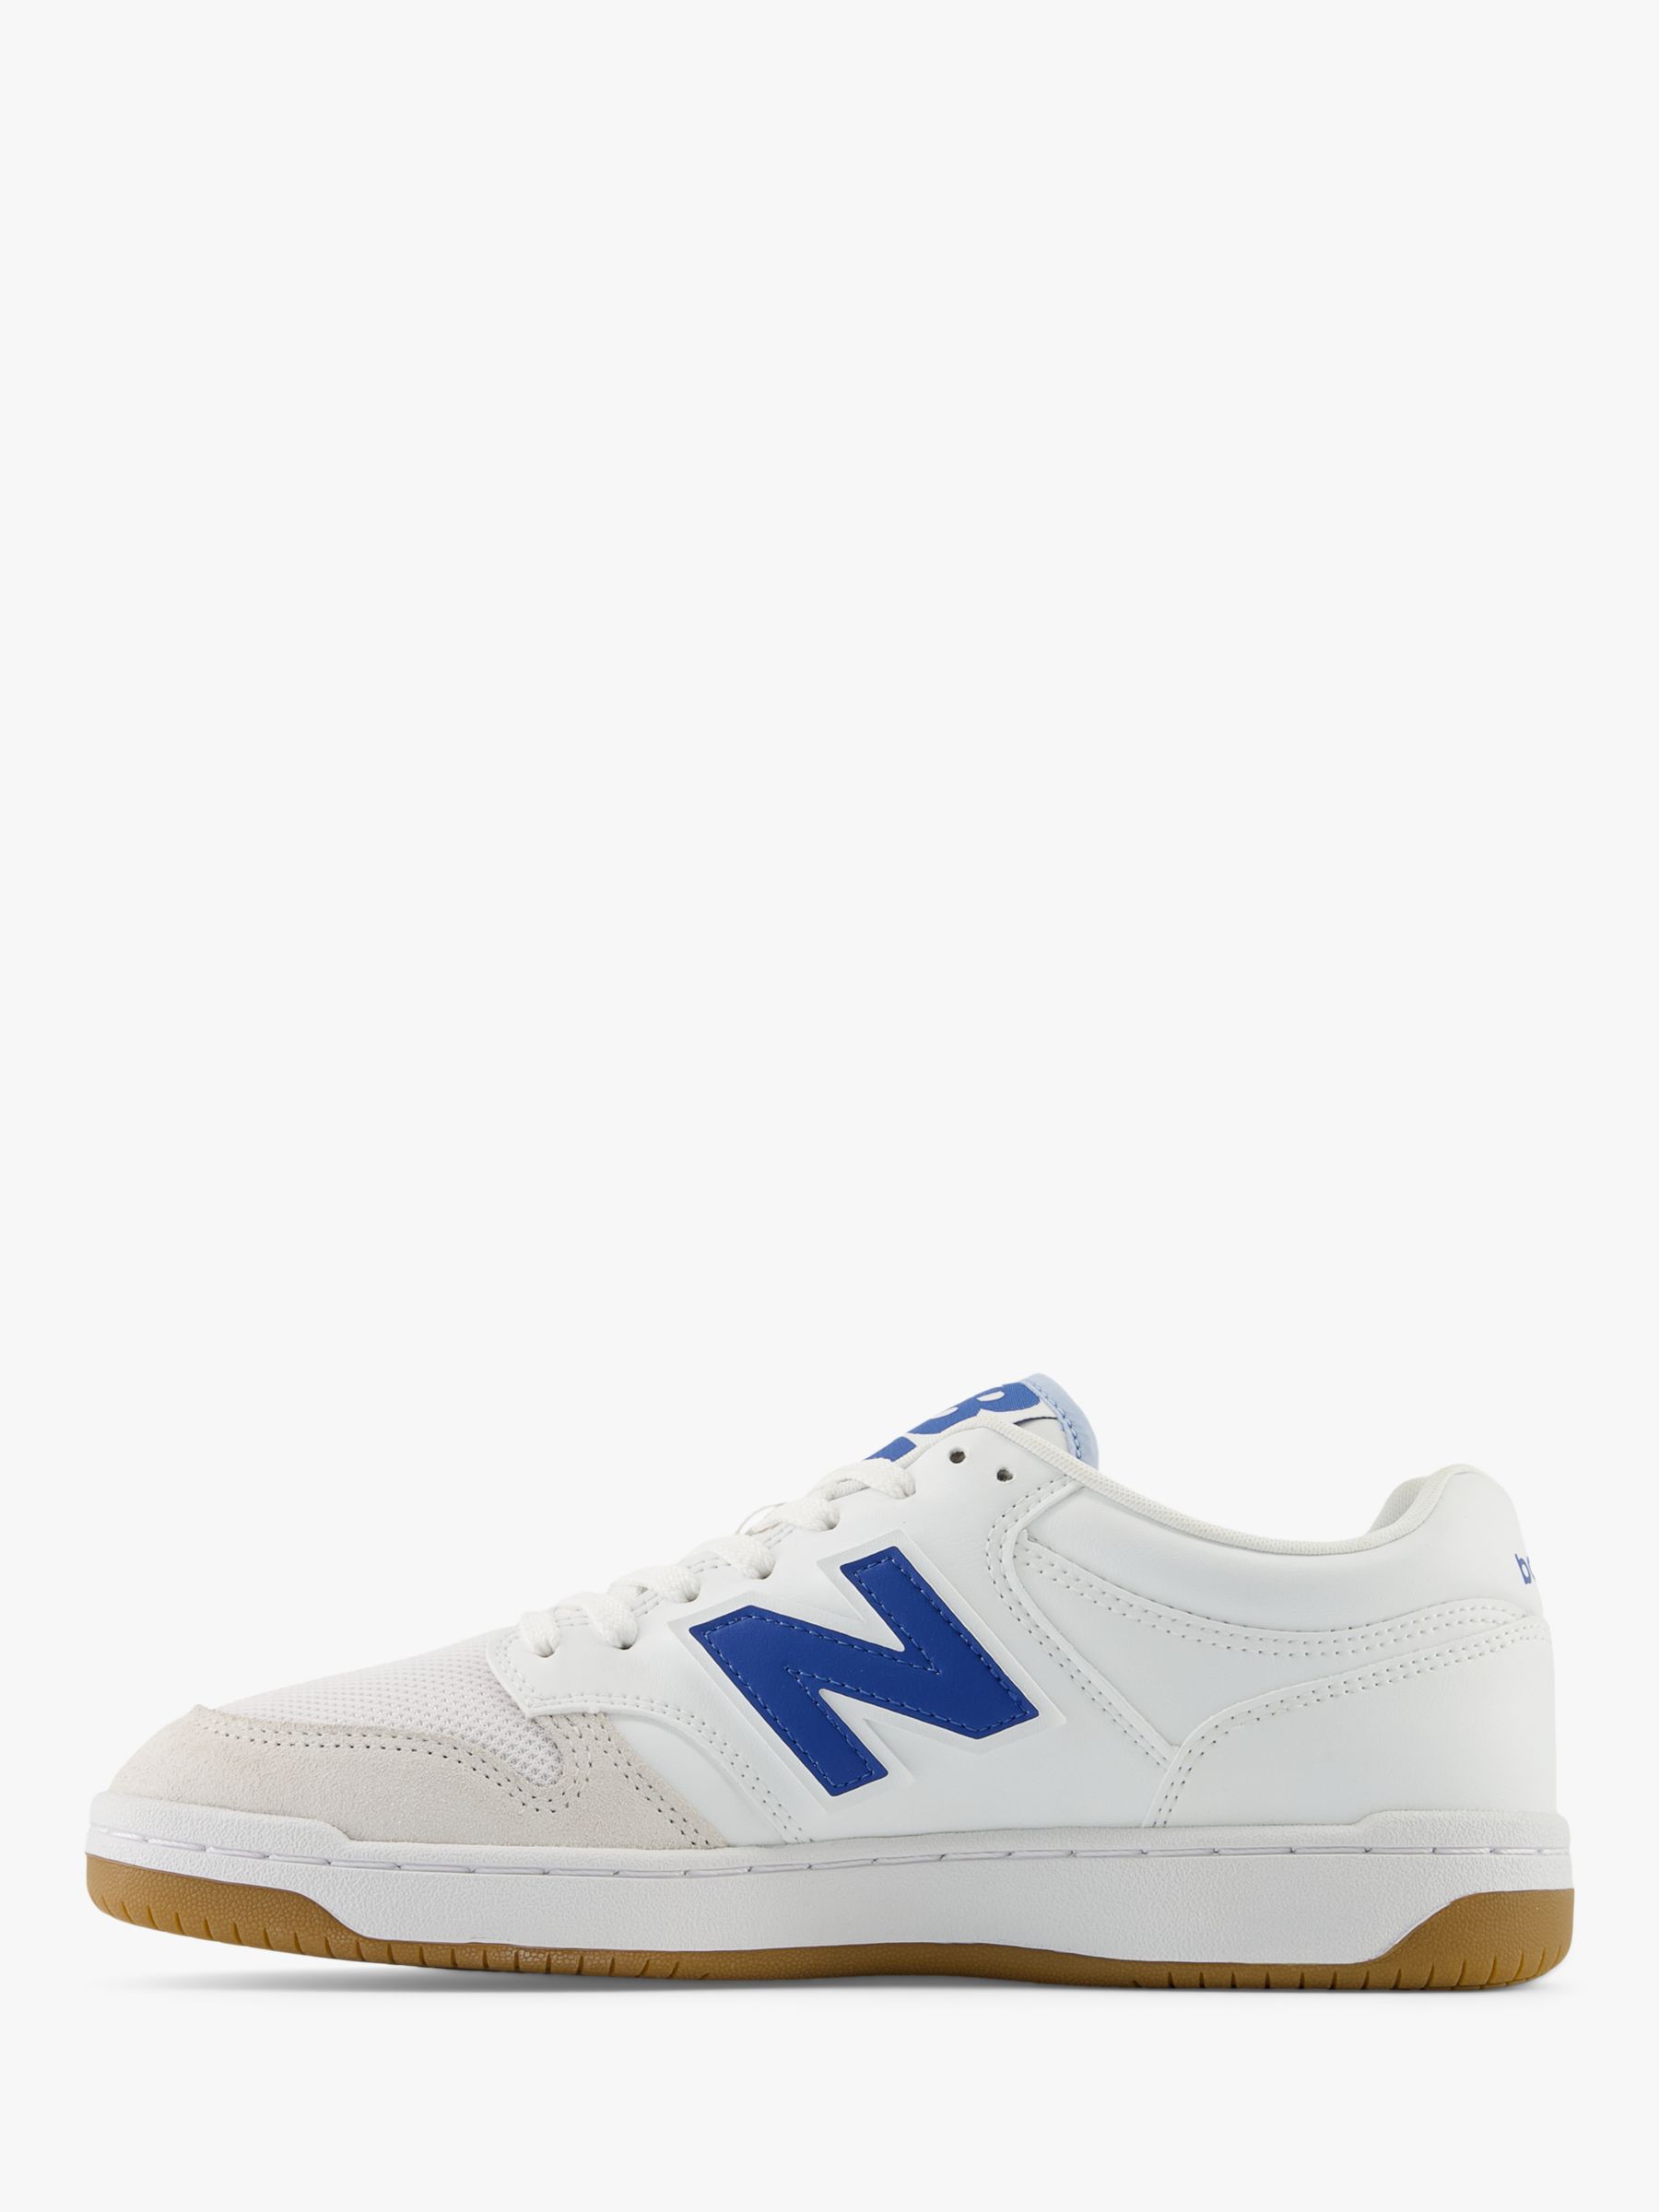 New Balance 480 Leather Trainers, White/Blue at John Lewis & Partners